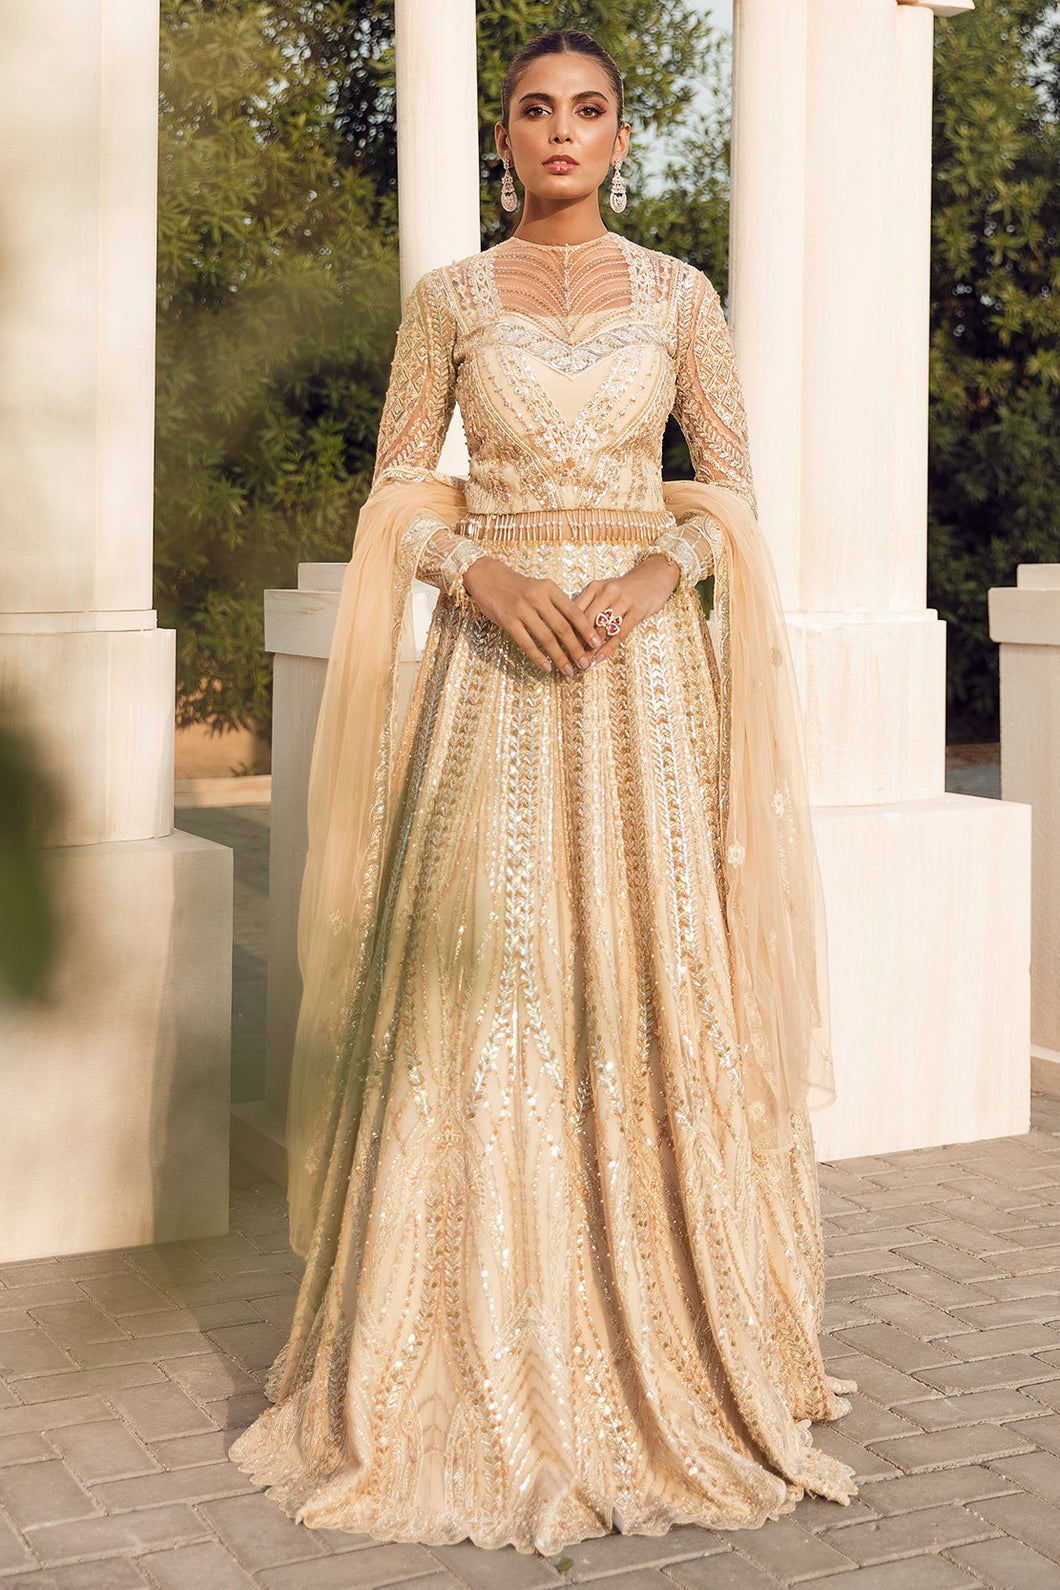 Shop now  Reign - REIGNAISSANCE ADARA Off-White Wedding Collection at our Online Boutique www.LebaasOnline.co.uk., IMROZIA COLLECTION UK Indian Wedding Dresses Online UK, USA & Canada. PAKISTANI BRIDAL DRESSES ONLINE USA Online  SALE. Browse latest Reign Pk Online from Lebaasonline in UK, France, Birmingham at SALE!